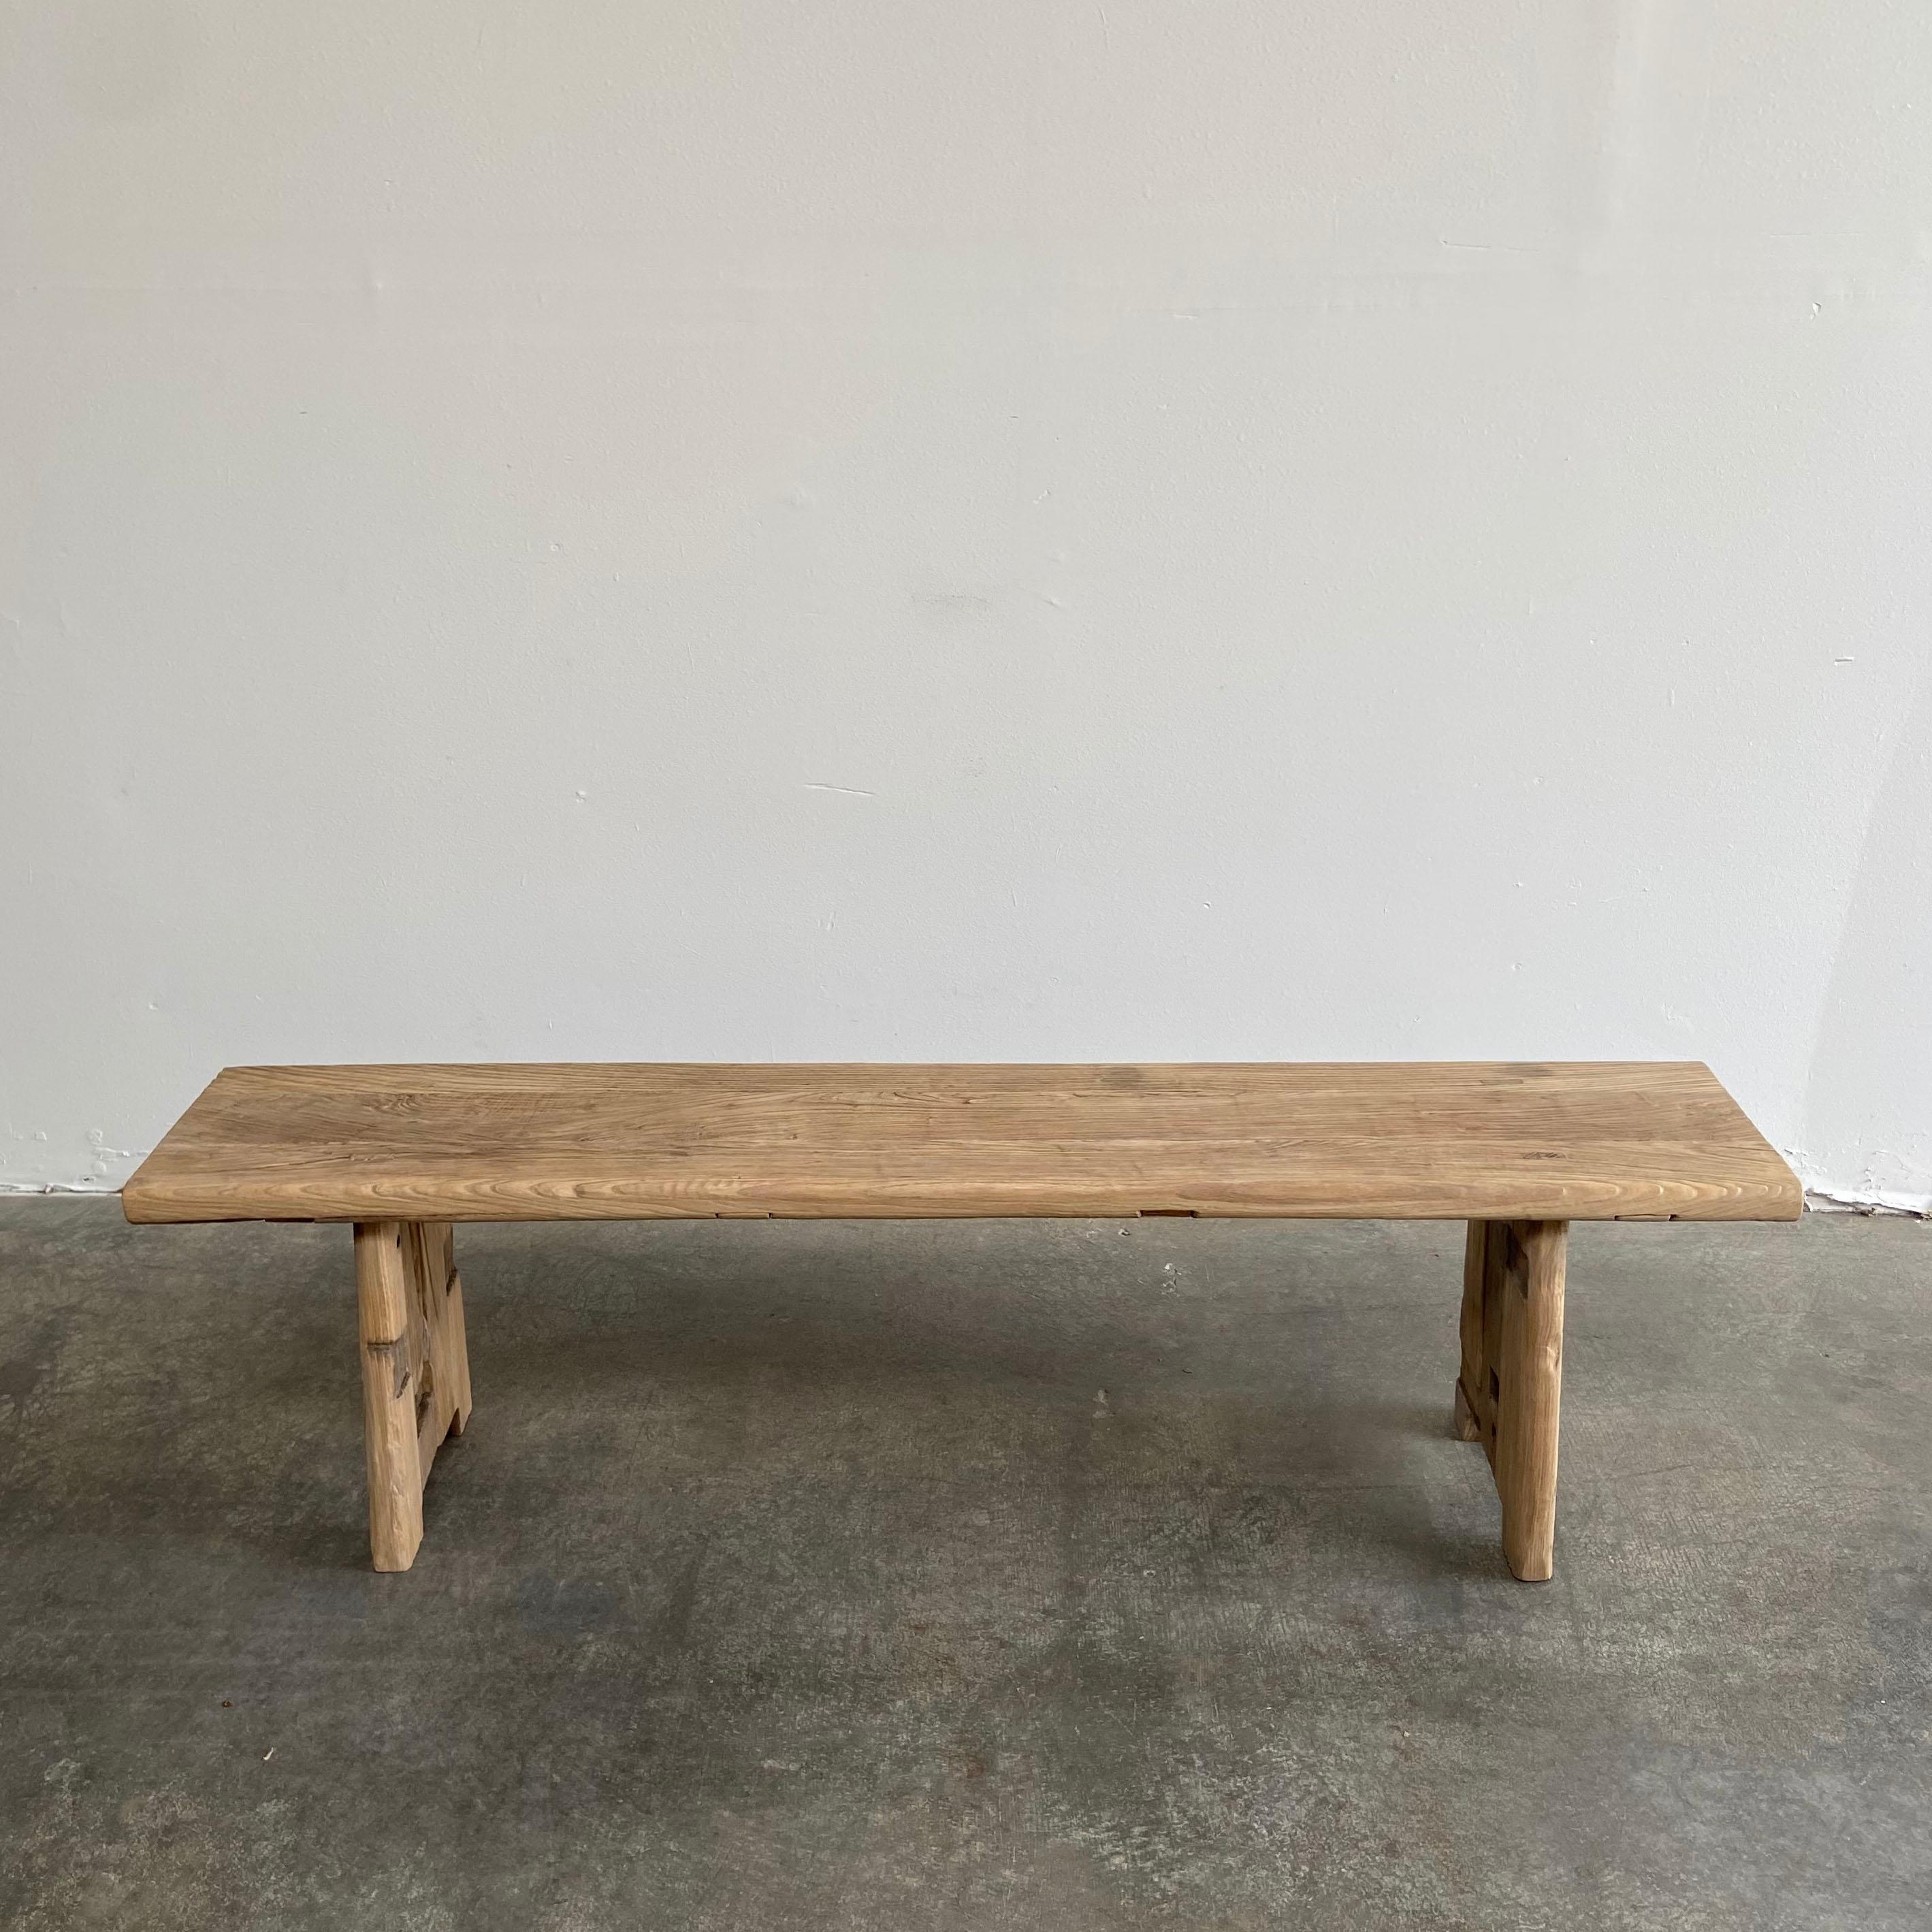 Elm wood benches made from vintage reclaimed antique elm wood pieces! Beautiful antique patina, with weathering and age, these are solid and sturdy ready for daily use, use as as a table behind a sofa, stool, coffee table, they are great for any